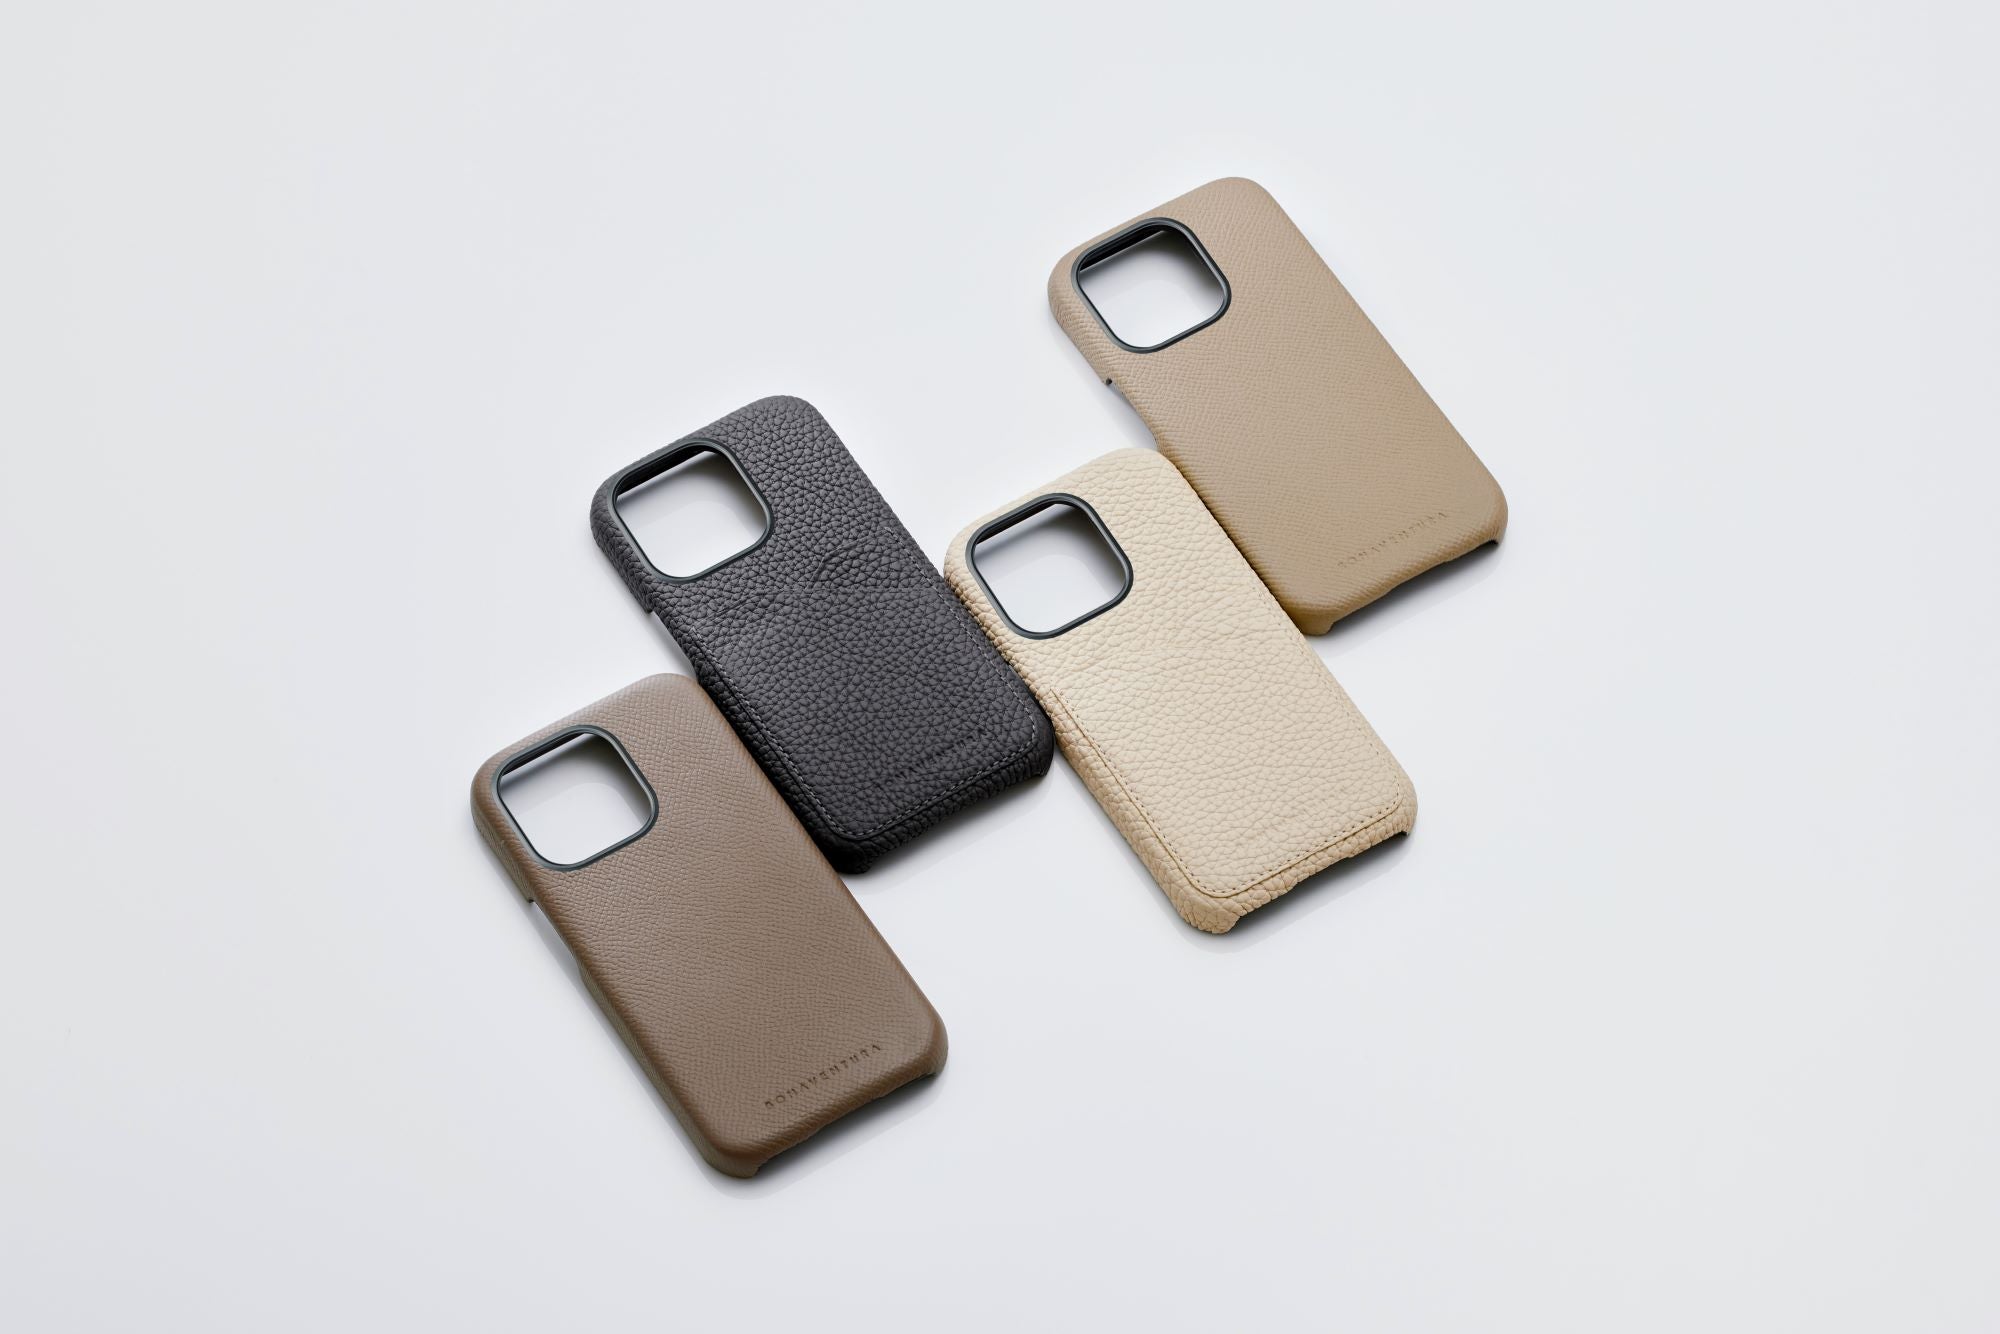 "BONAVENTURA | Restock Information | High-quality leather, timeless and sophisticated beautiful genuine leather accessories" Genuine leather notebook-style smartphone case. High-quality iPhone case made from the finest genuine leather. Genuine leather smartphone case for iPhoneSE / iPhone8 / iPhoneX / iPhone11 / iPhone12 / iPhone13 / iPhone14. Luxury leather brand bags. Luxury leather brand wallets and leather accessories. Genuine genuine leather Apple Watch band.